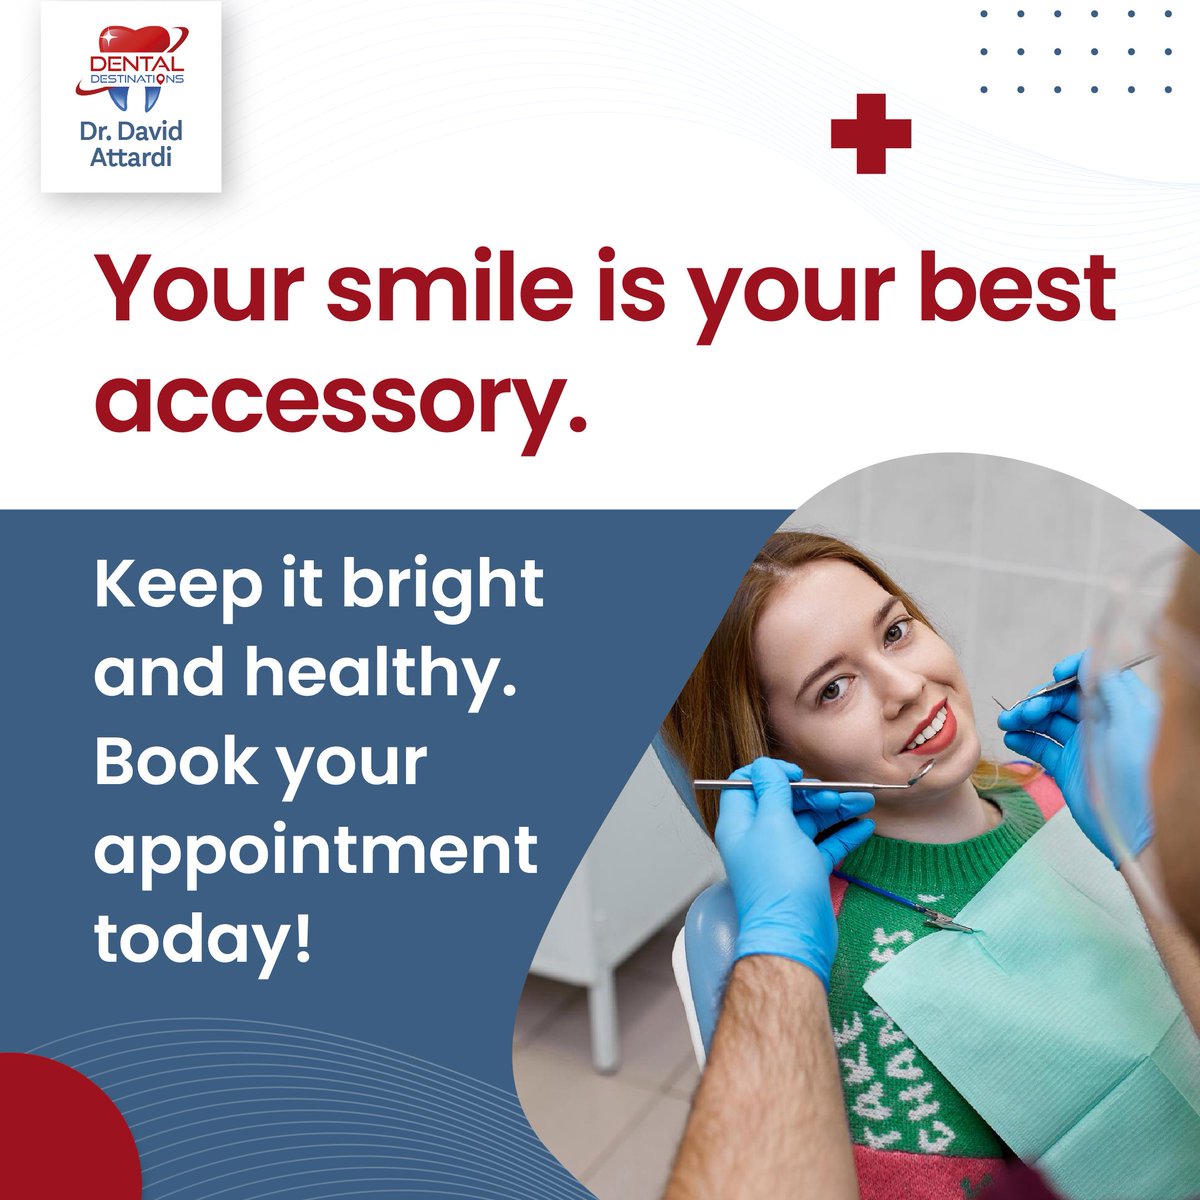 Healthy smile, happy you! Invest in your well-being with a dental appointment. It's never too late to start! #smilesforlife #preventivecare #booknow